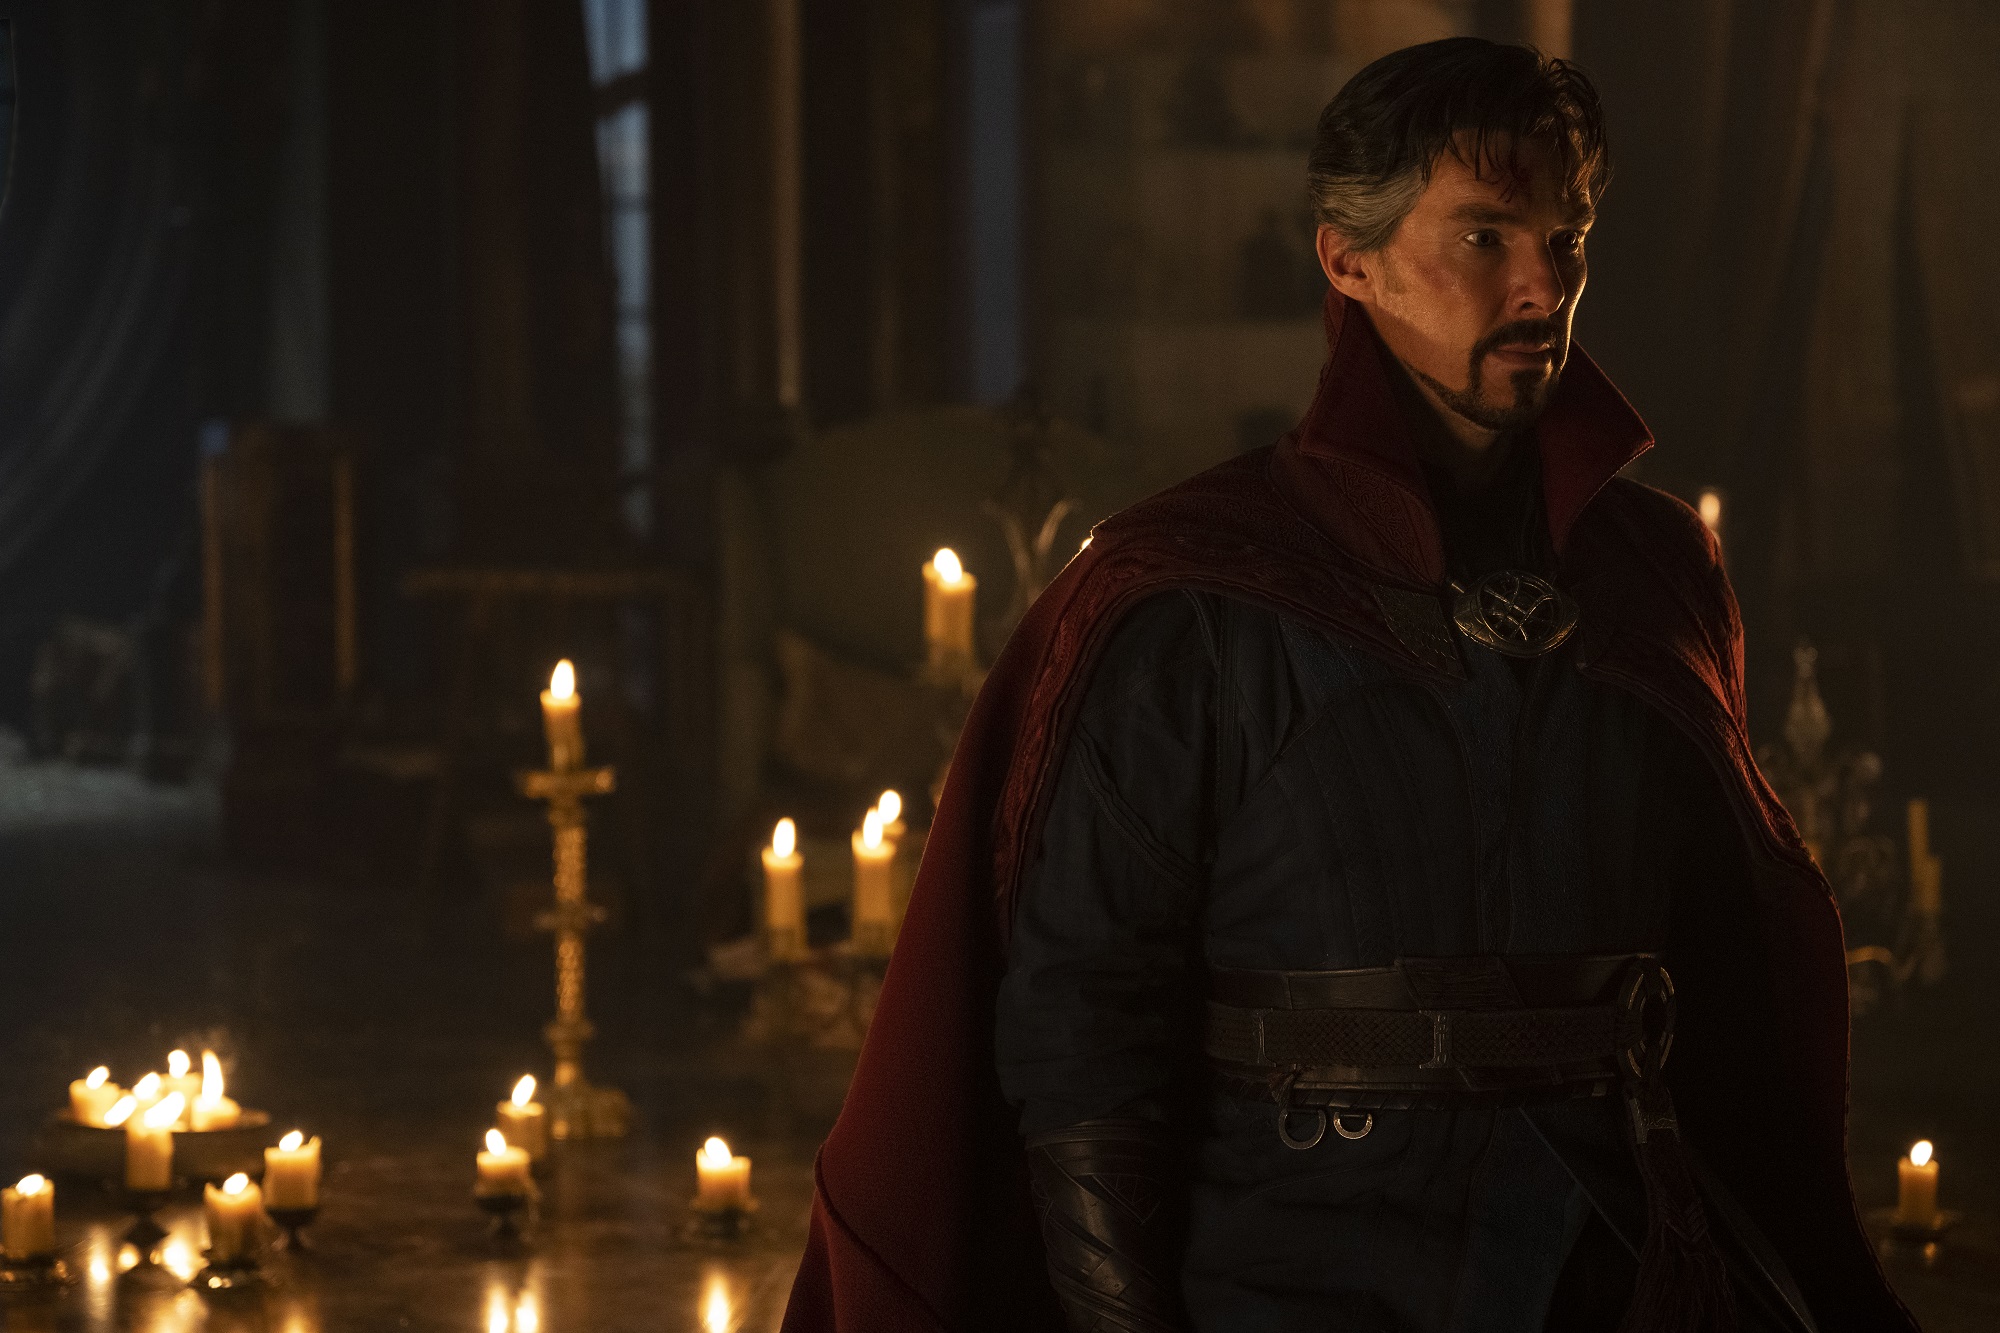 Doctor Strange in the Multiverse of Madness hits Disney Plus on June 22